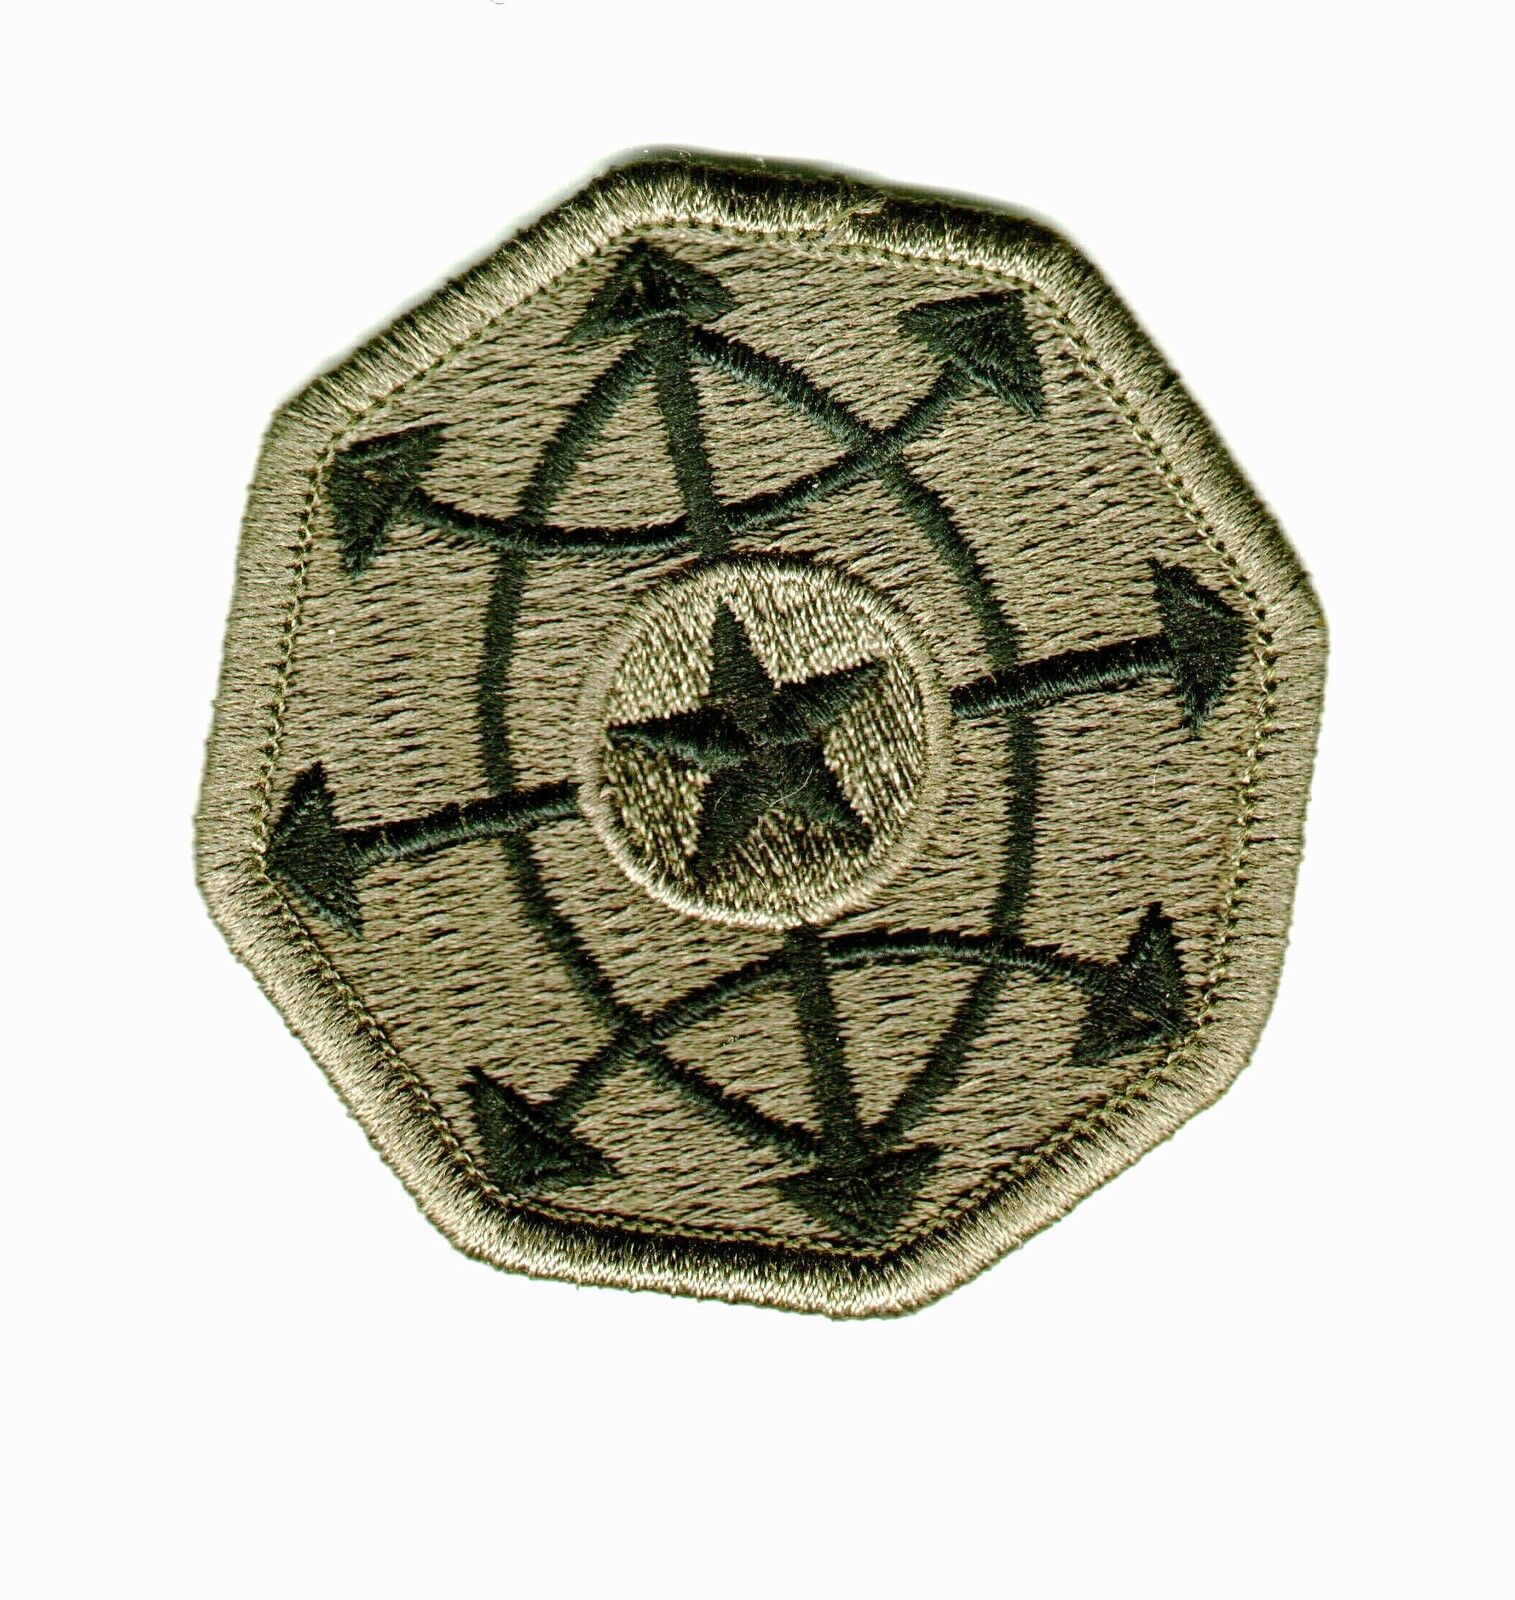 Primary image for CRIMINAL INVESTIGATIVE COMMAND PATCH SUBDUED U.S. ARMY PATCH